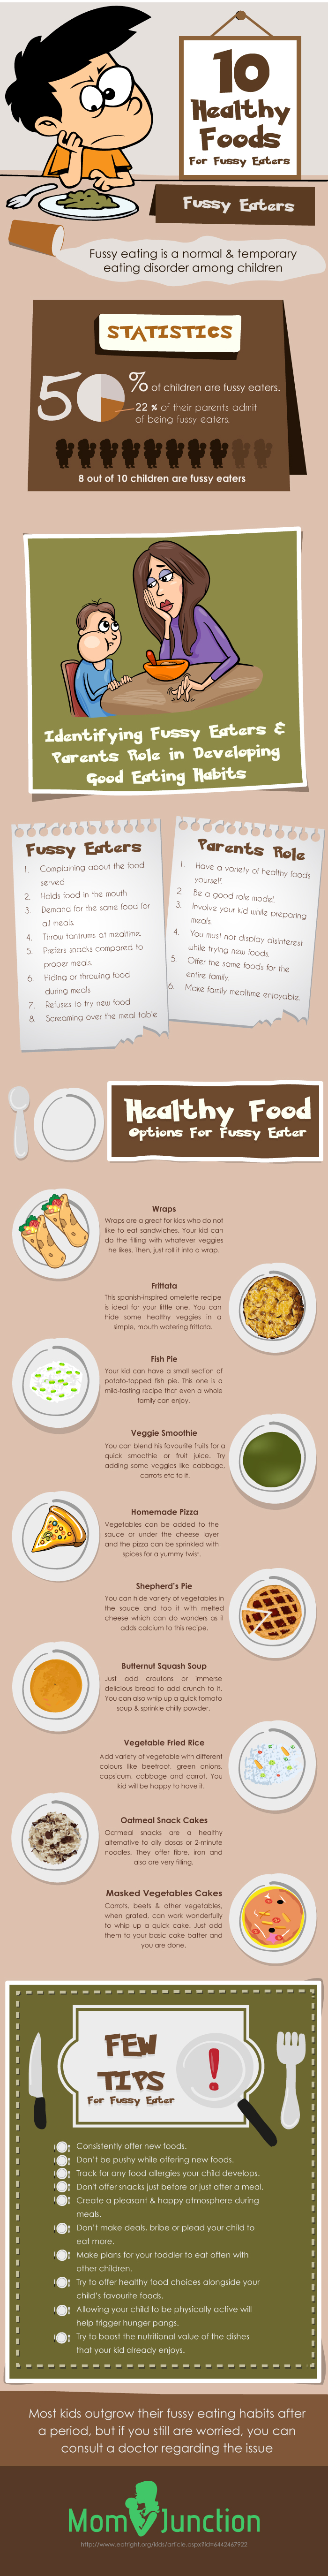 10 Healthy Food Options For Fussy Eaters